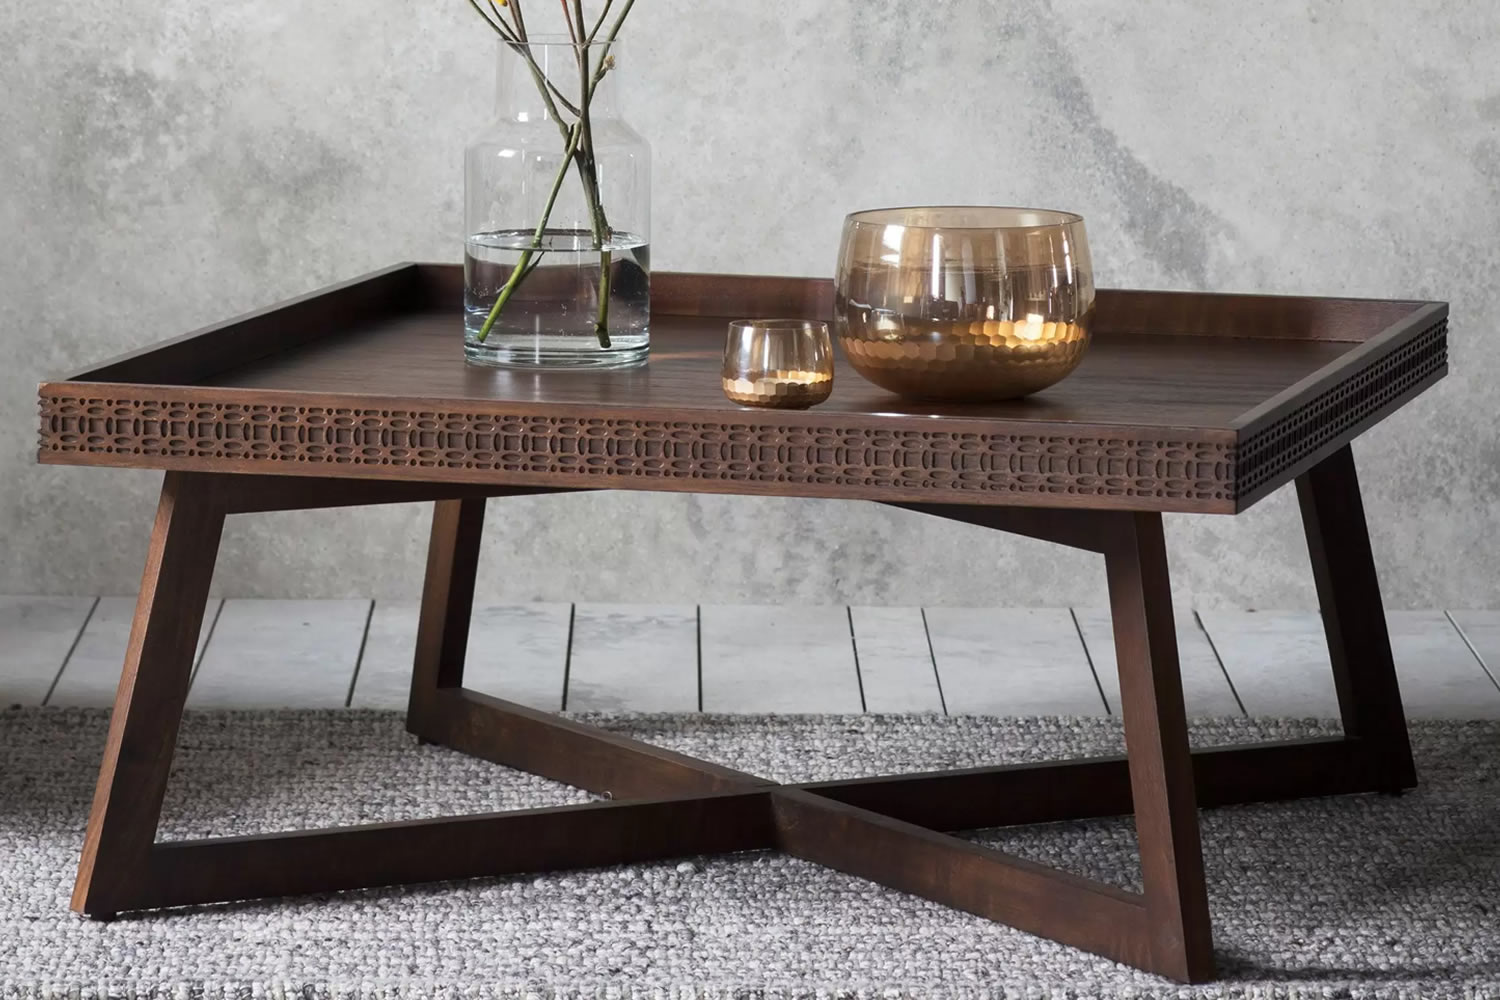 View Boho Brown Rectangular Wooden Coffee Table TrayStyle Top With Fretwork Pattern Crafted From Solid Mango Wood With Mixed Timber Veneers information